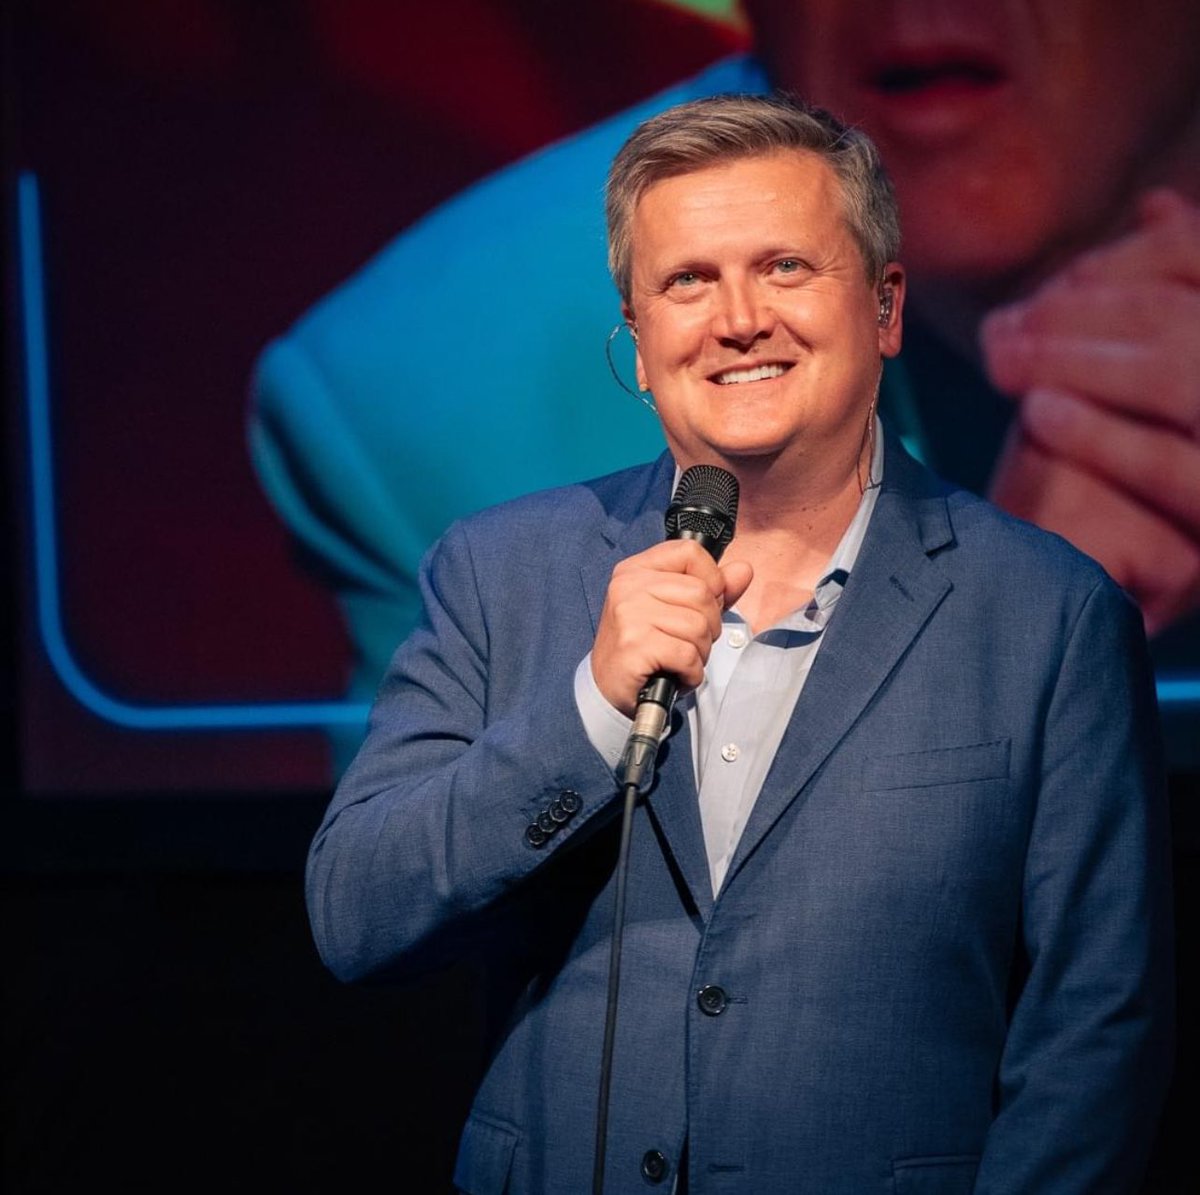 ✨ ALED JONES ‘Full Circle’ - BOOK EARLY THIS IS GOING TO BE A SELL-OUT! Captivating the world with his angelic voice. Selling over 7-million albums, Aled was the original, classical crossover star. 📅 11 May, 2025 blackpoolgrand.co.uk/event/aled-jon… #BlackpoolGrand #AledJones #whatson